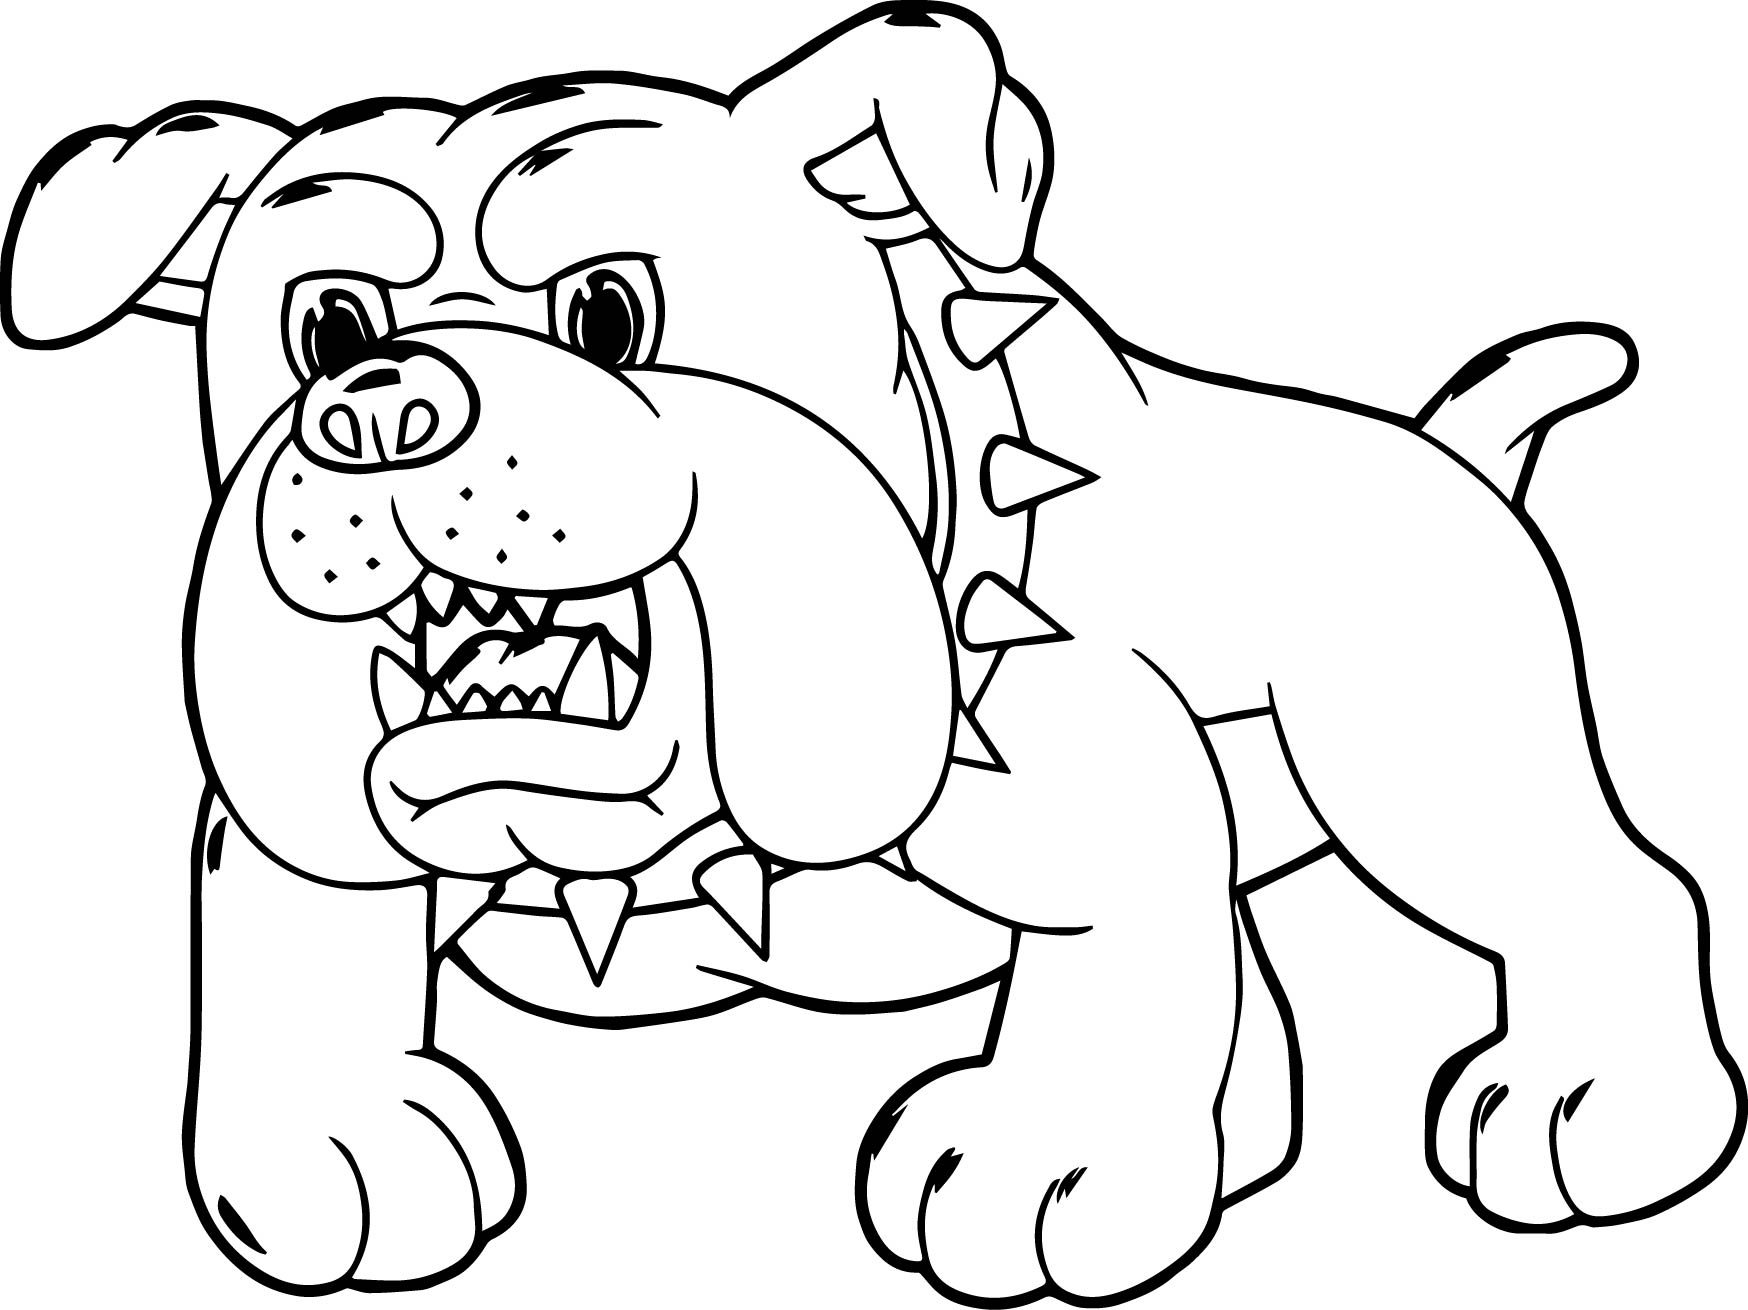 Dog Cartoon Coloring Pages at GetColorings.com | Free printable